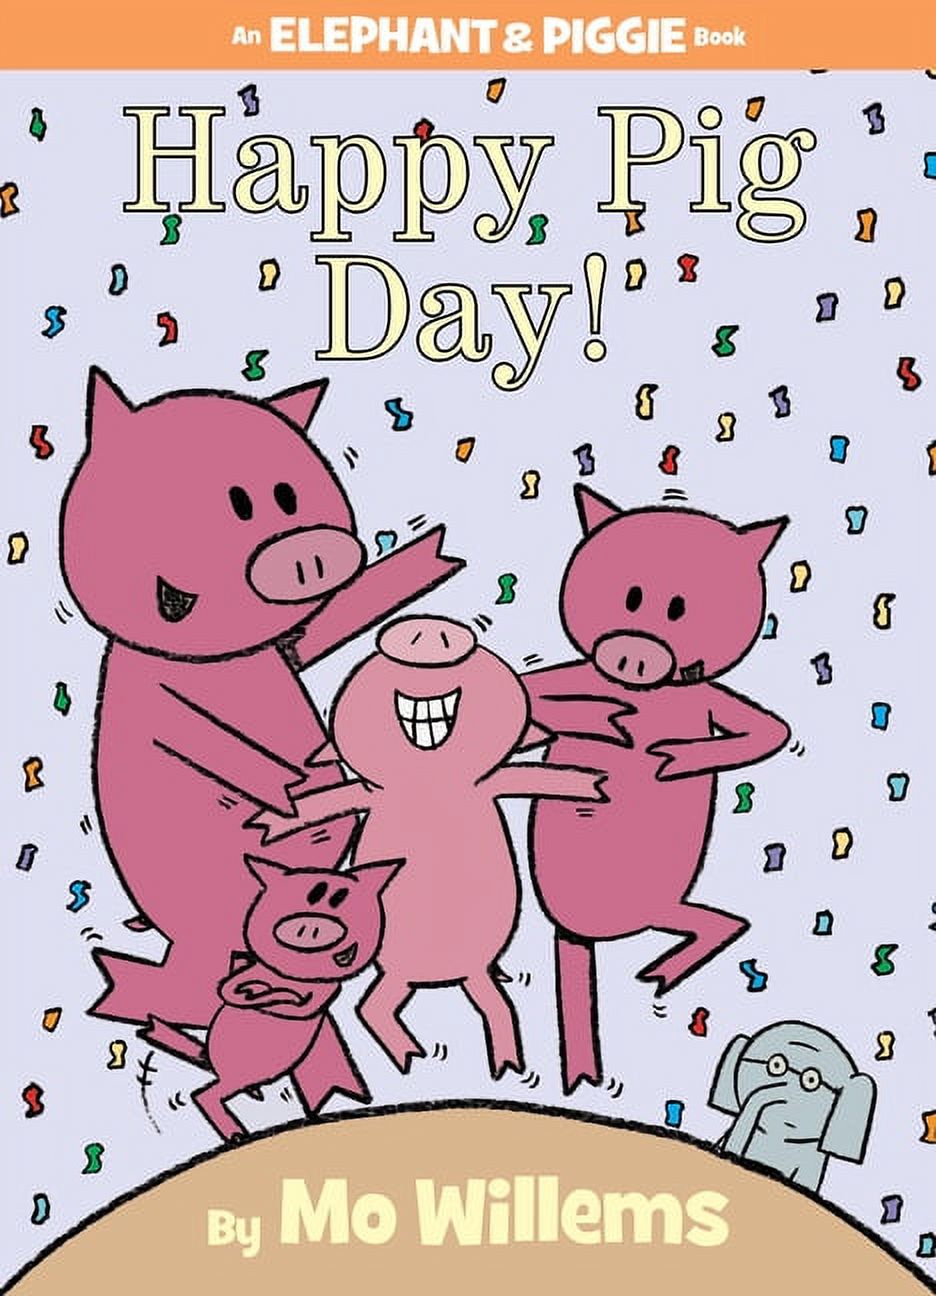 An Elephant and Piggie Book: Happy Pig Day!-An Elephant and Piggie Book (Series #15) (Hardcover) - image 1 of 1